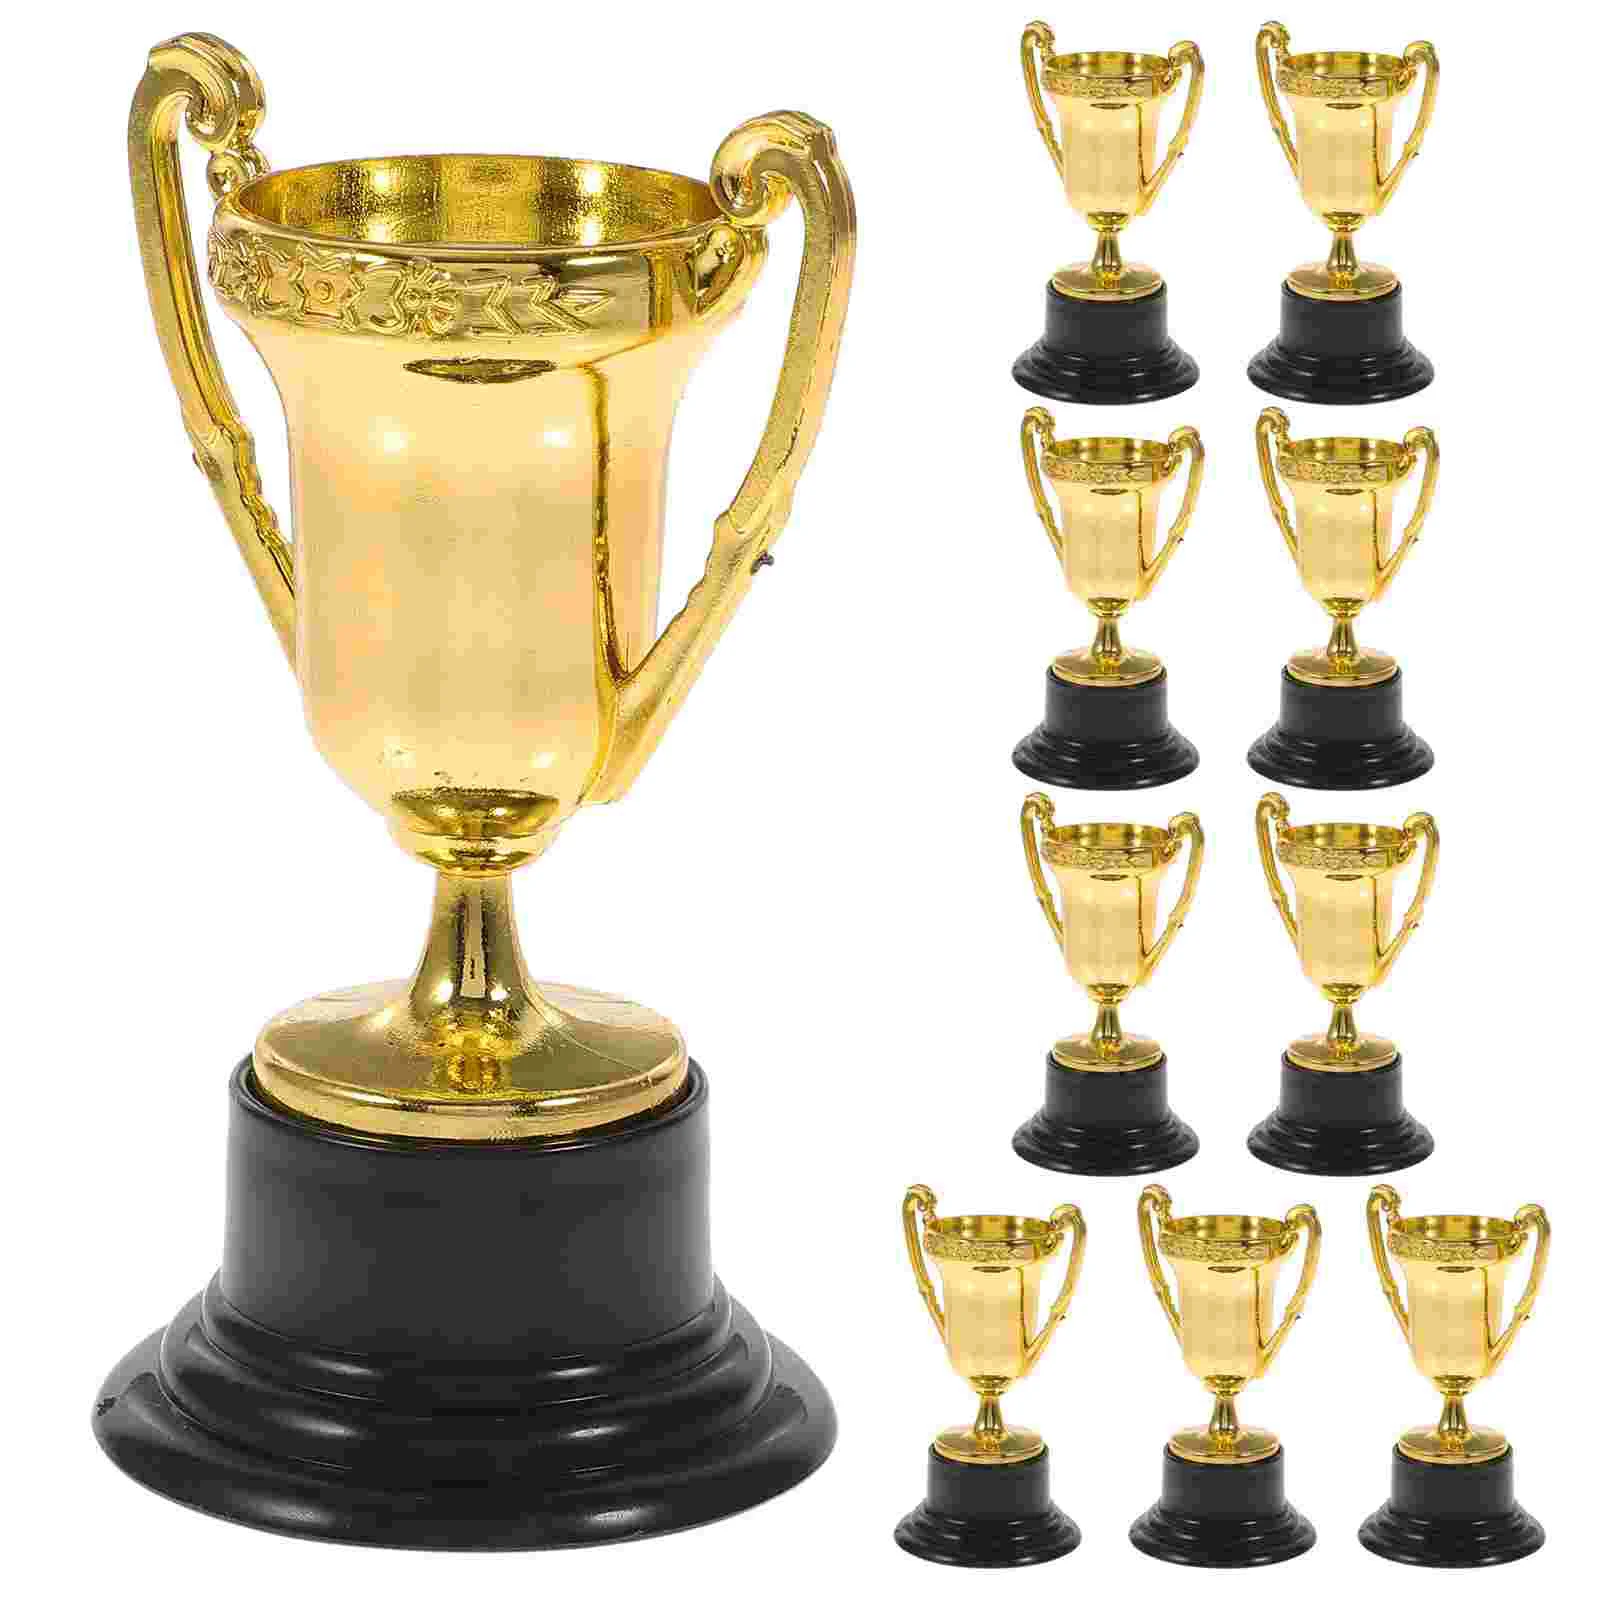 

Trophies Trophy Kids Awardplastic Mini Cup Gold Awards Winner Children Cups Party Learning Early Soccertoy Favors Golden Medals